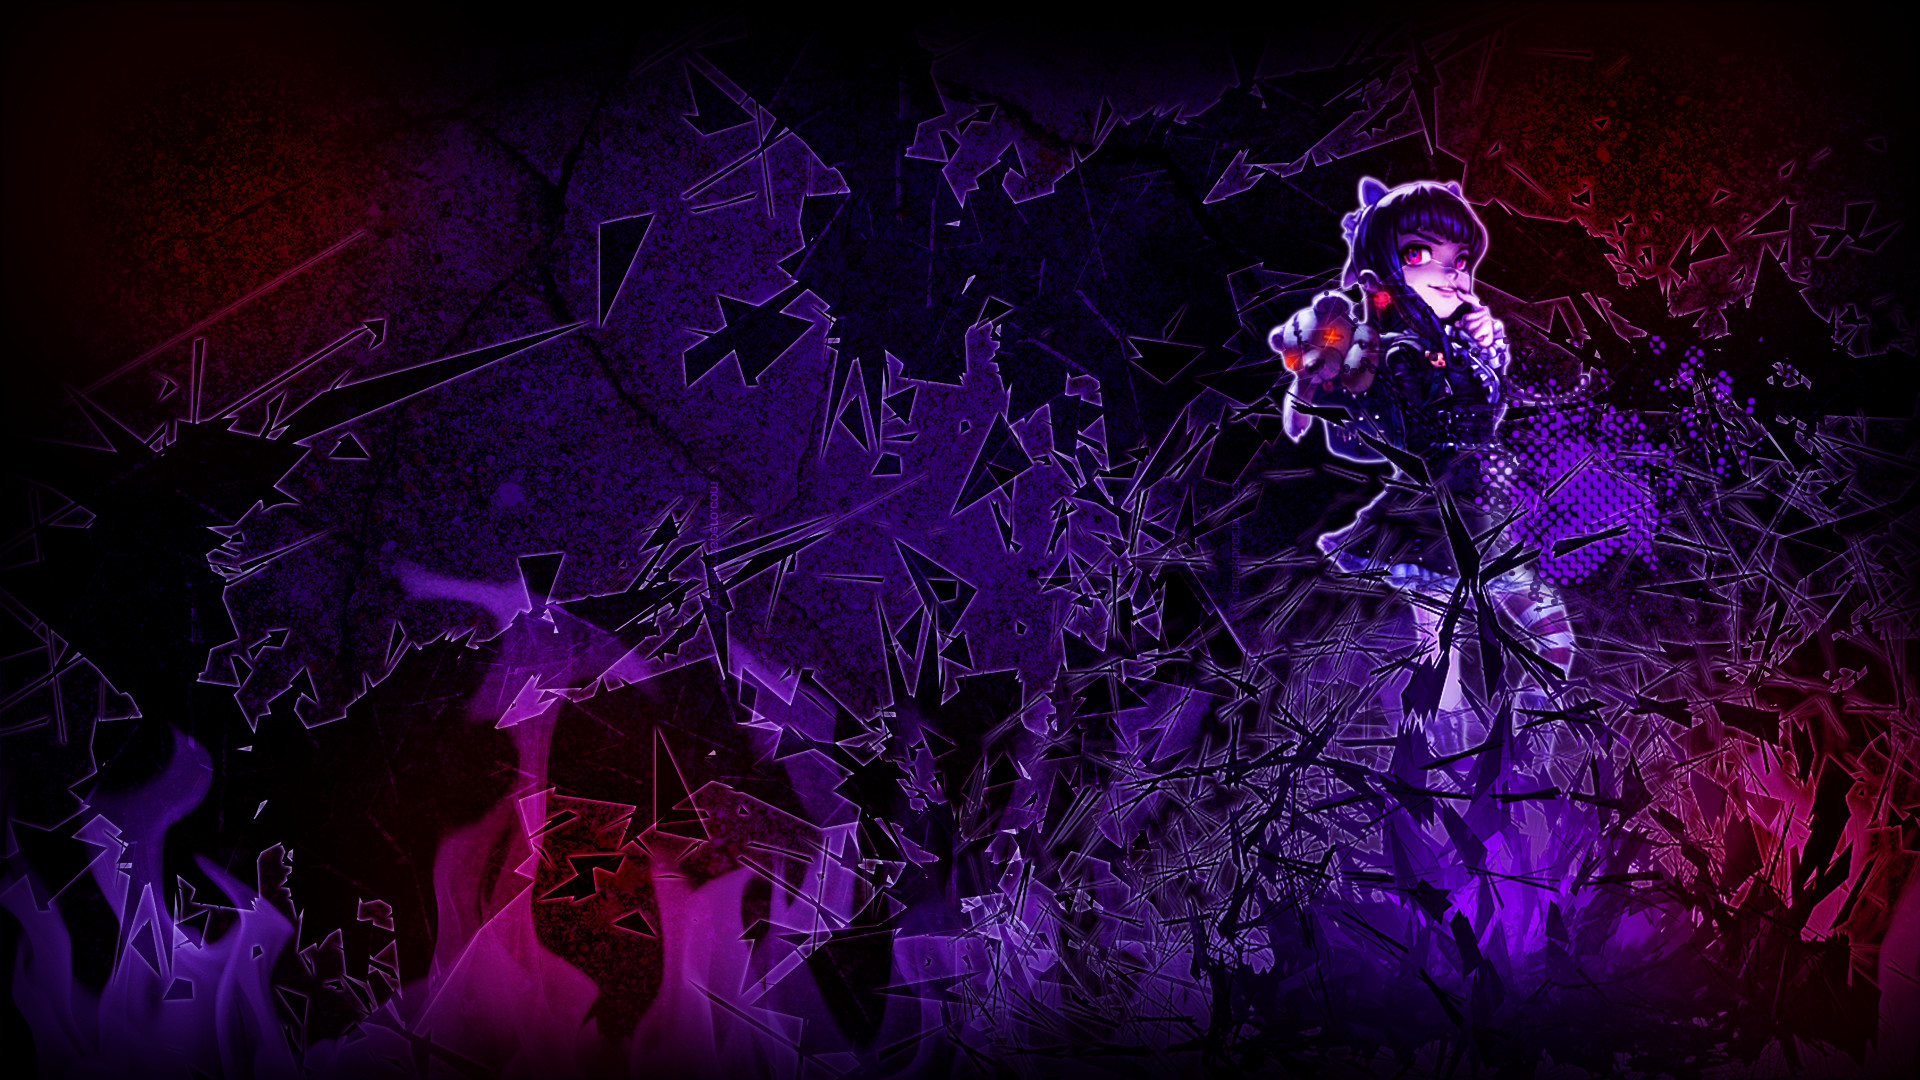 1920x1080 Goth Annie Wallpaper without text by MinccinoFloof Goth Annie Wallpaper  without text by MinccinoFloof